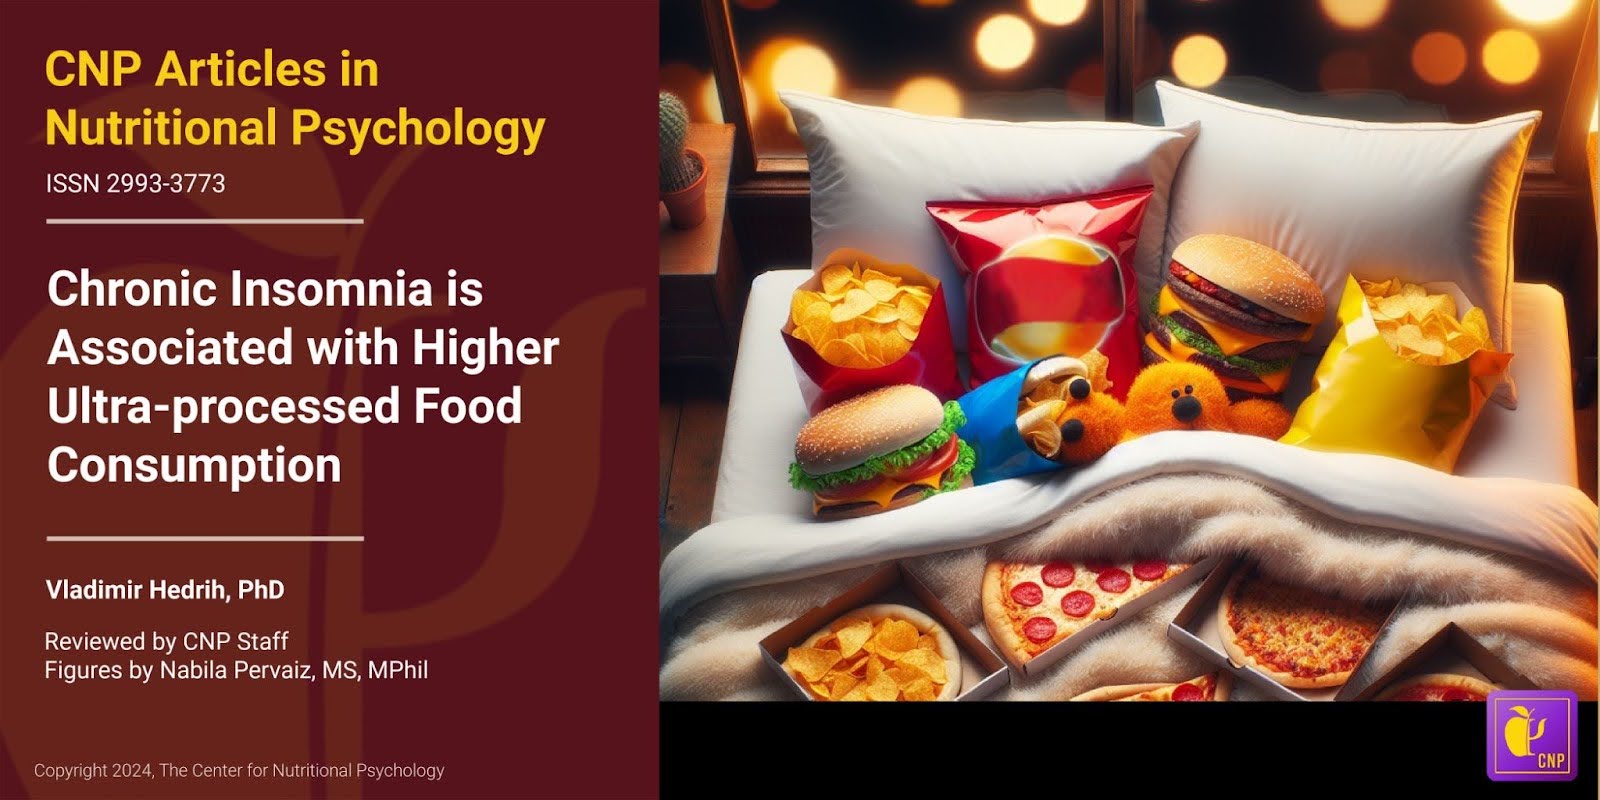 Chronic Insomnia is Associated with Higher Ultra-processed Food Consumption